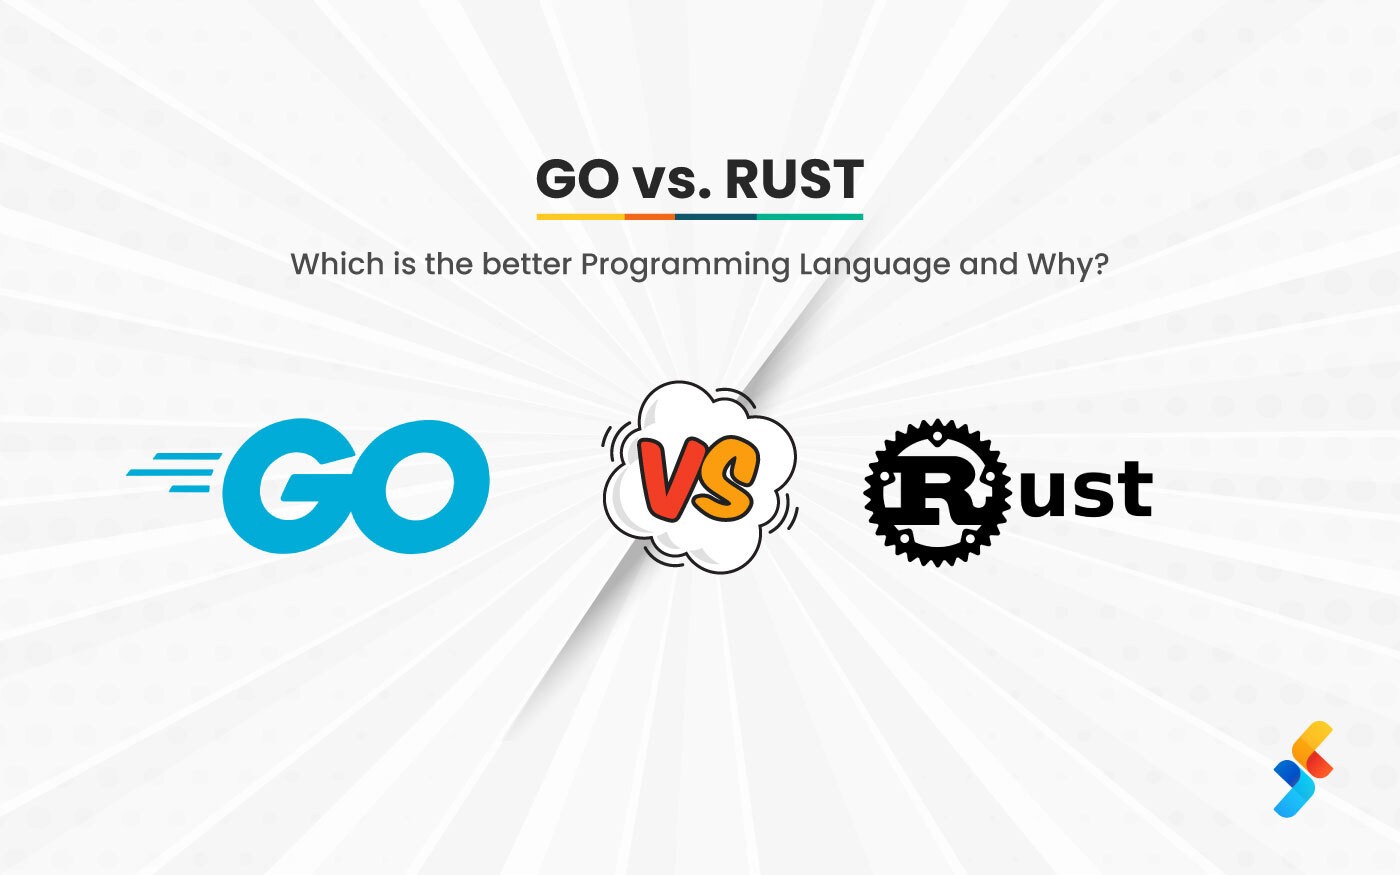 Go vs Rust: Which is the better Programming Language and Why?